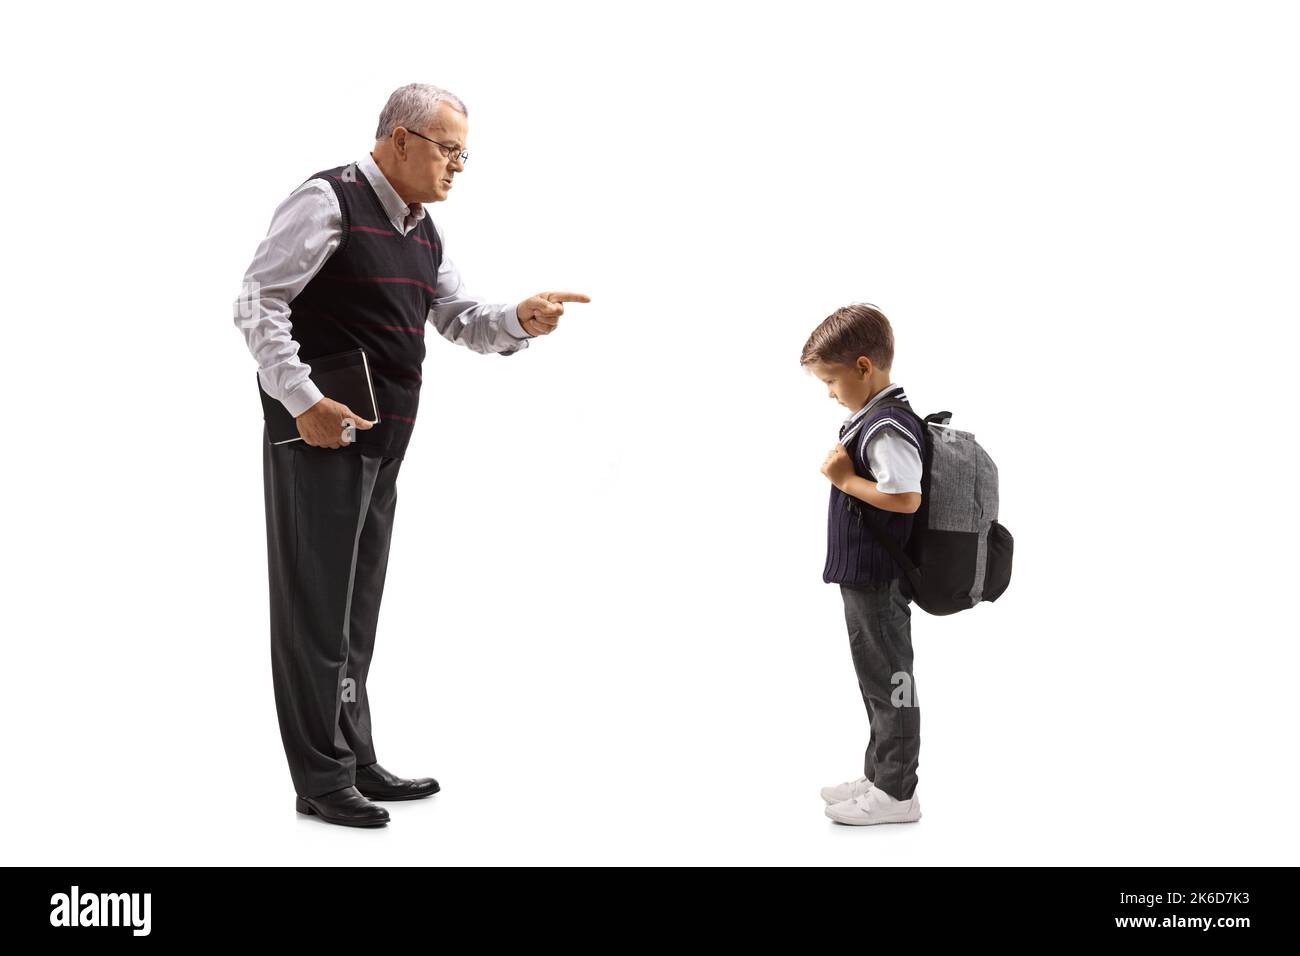 Full length profile shot of a teacher scolding a schoolboy isolated on white background Stock Photo